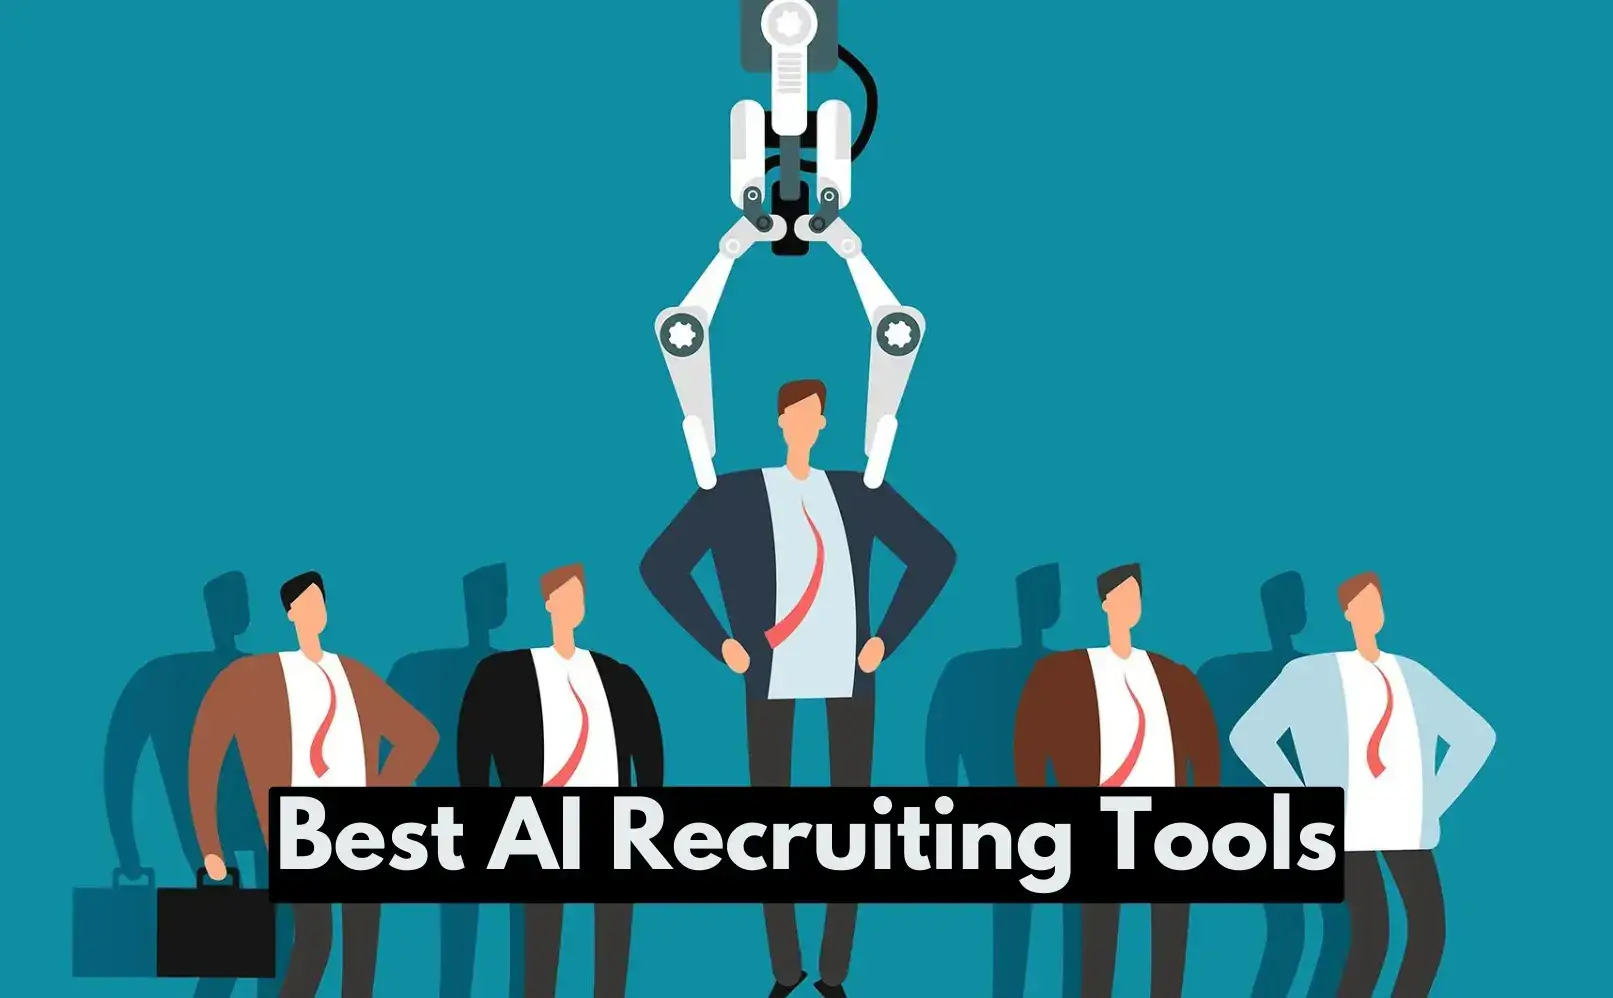 Elevate hiring with the Best AI Recruiting Tools—explore Fetcher, TurboHire, and Manatal for efficient talent acquisition.